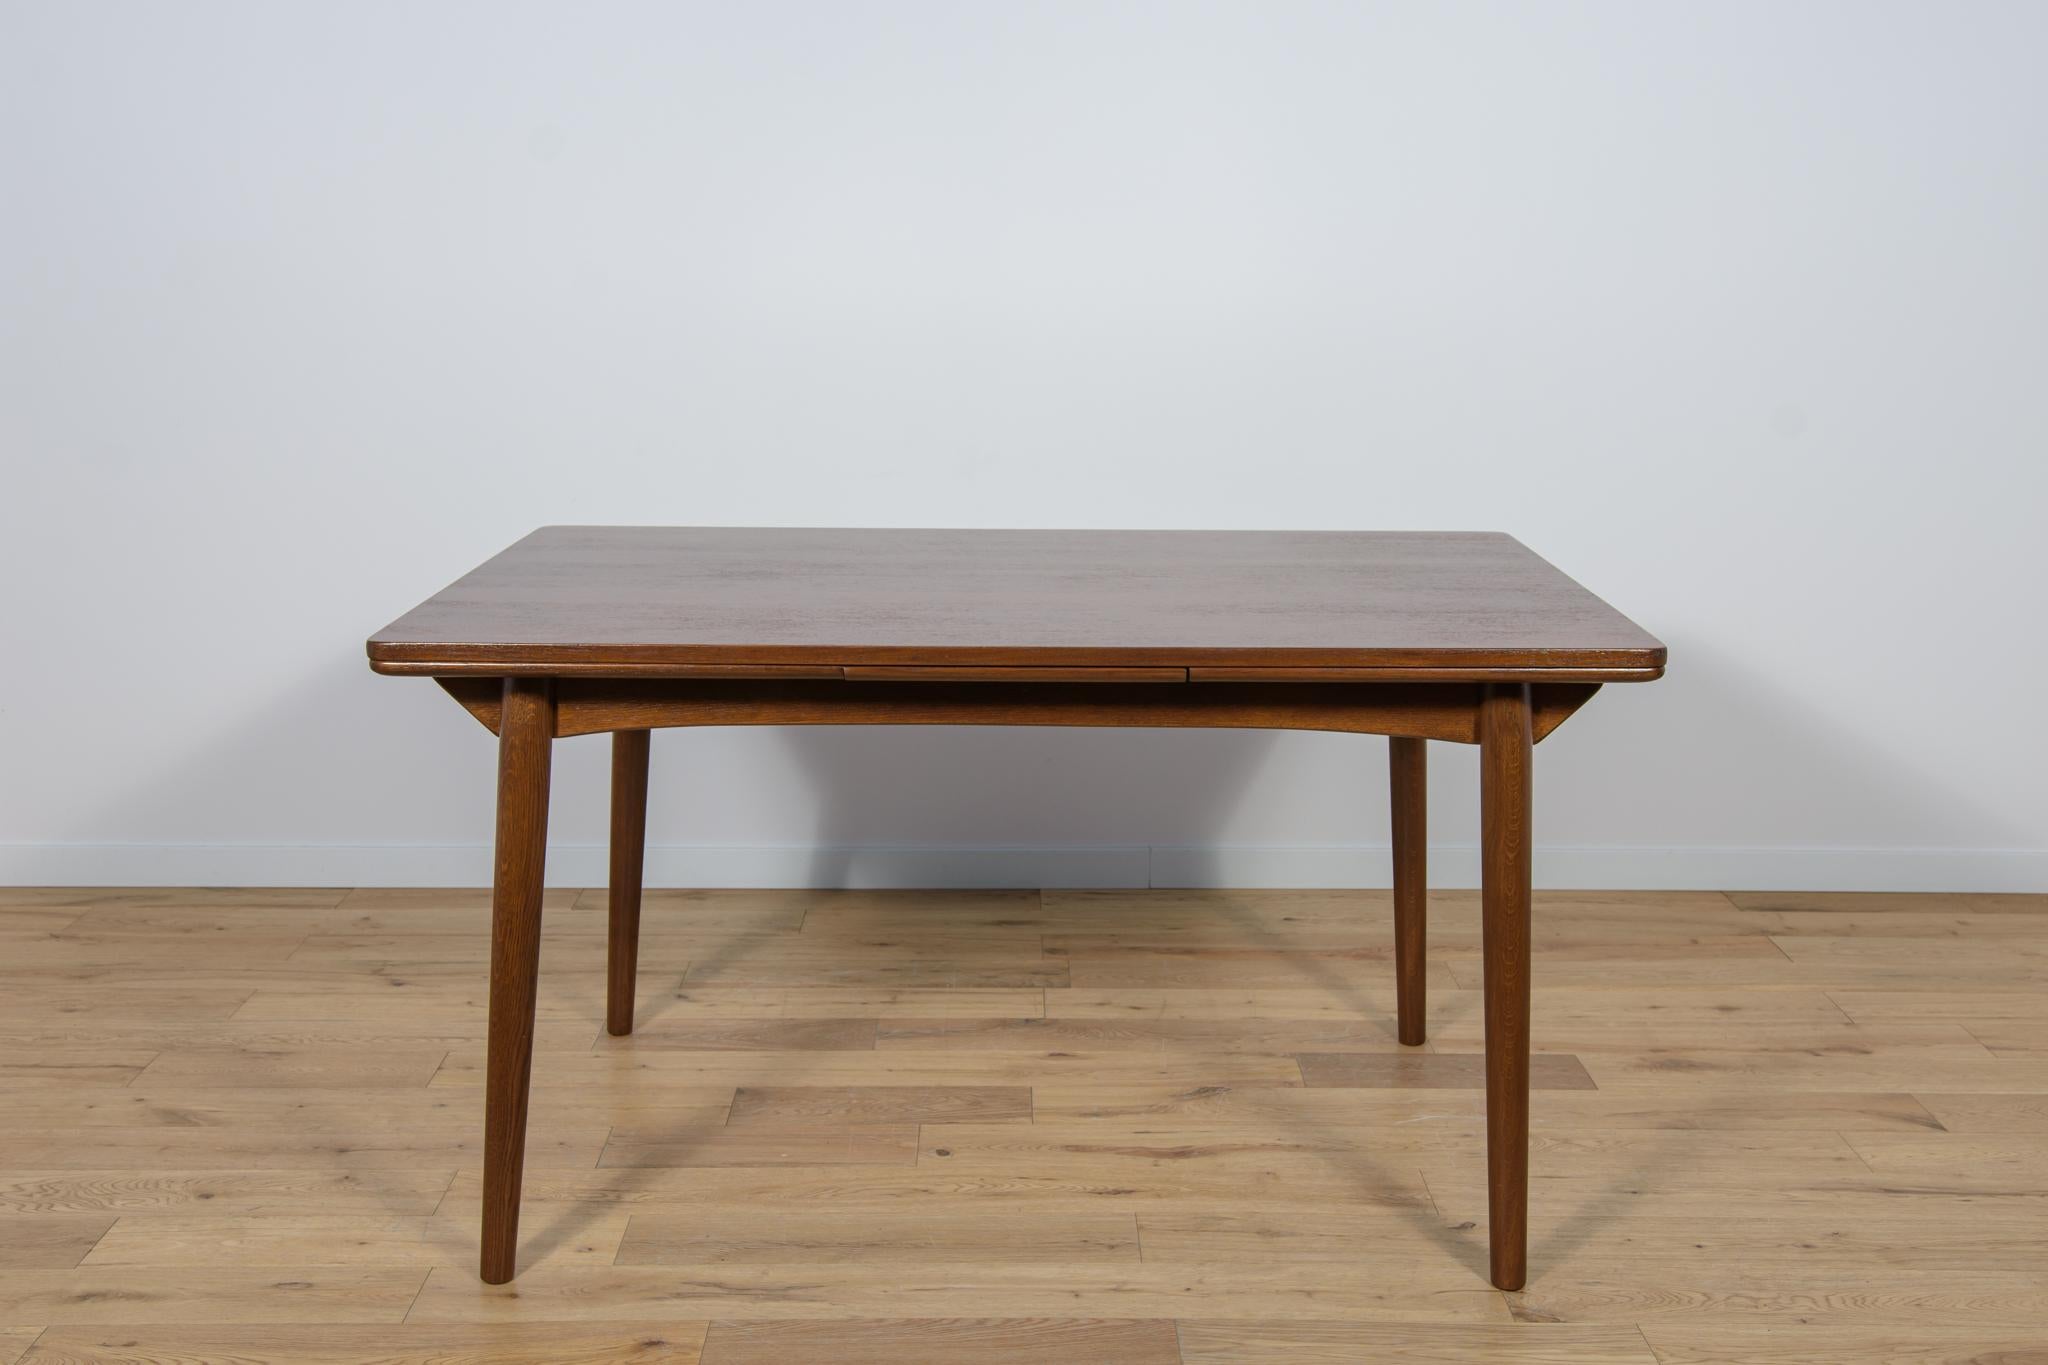 The extendable tea wood table was produced in Denmark in the 1960s.The furniture has been completely renovated, cleaned of the old coating, painted with rosewood stain, finished with a strong semi-matte varnish. The table extends through two